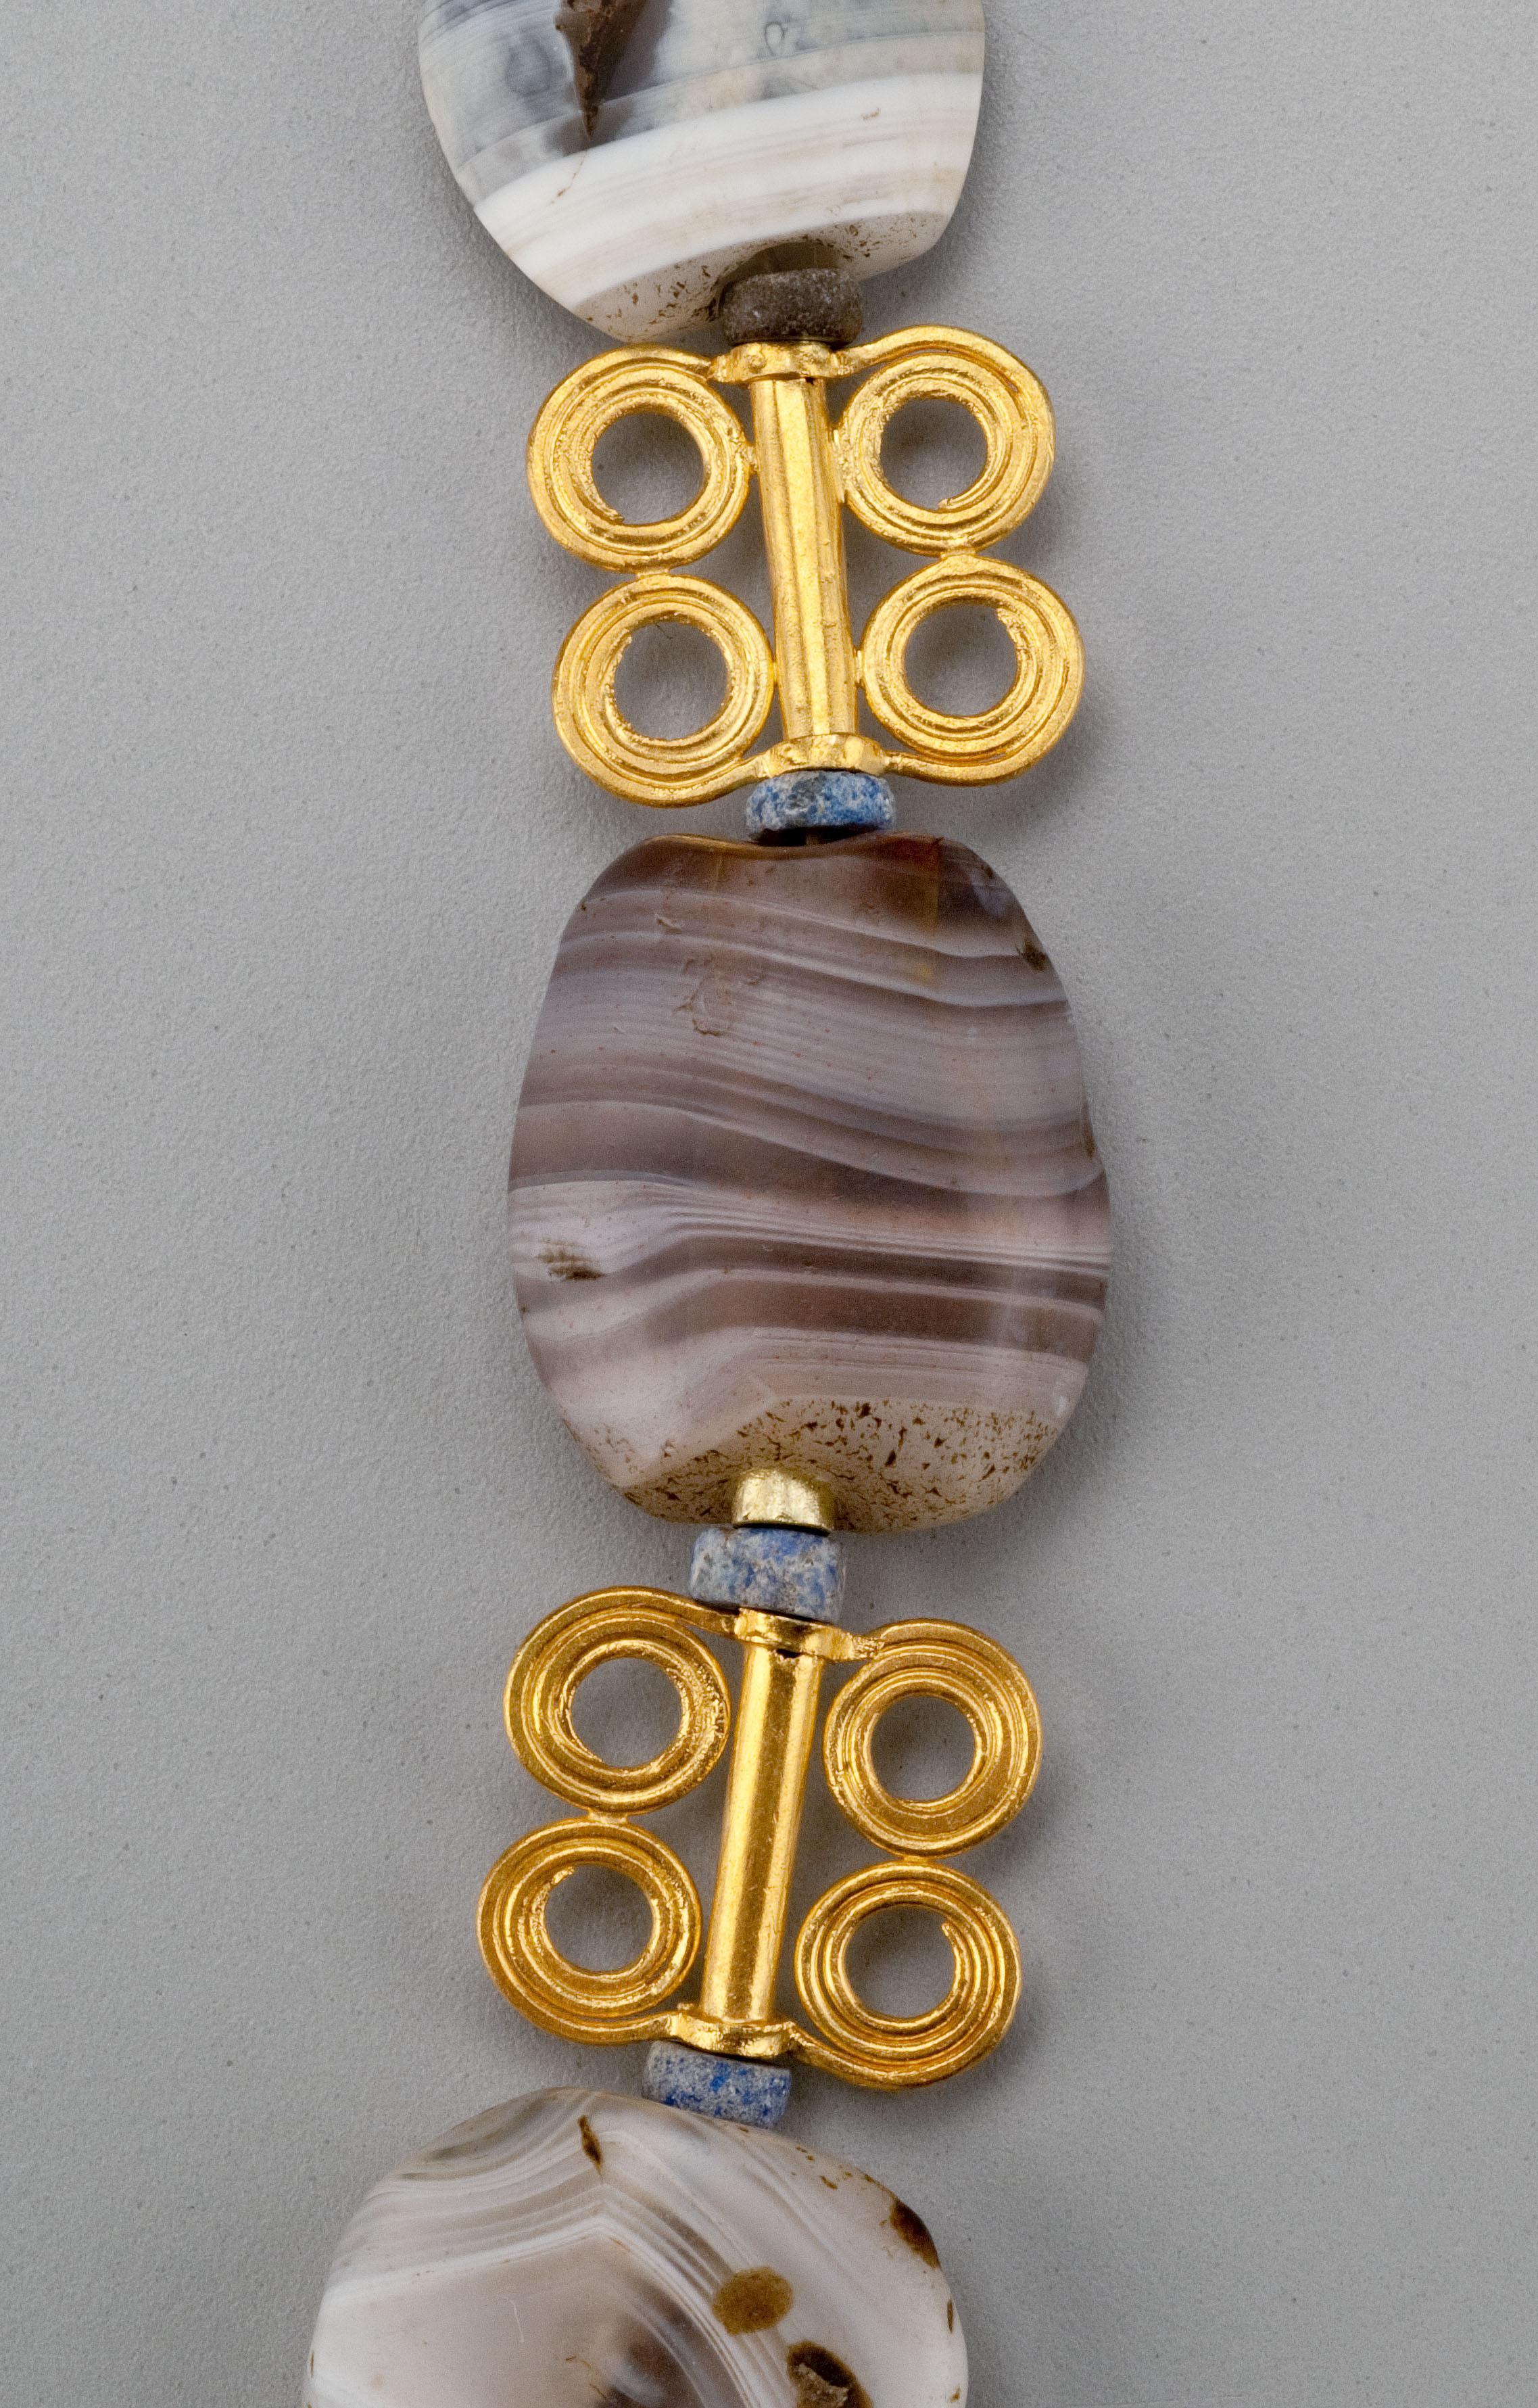 Artist Four Thousand Year Old Agate Beads Alternating with Quadruple Spiral Gold Beads For Sale